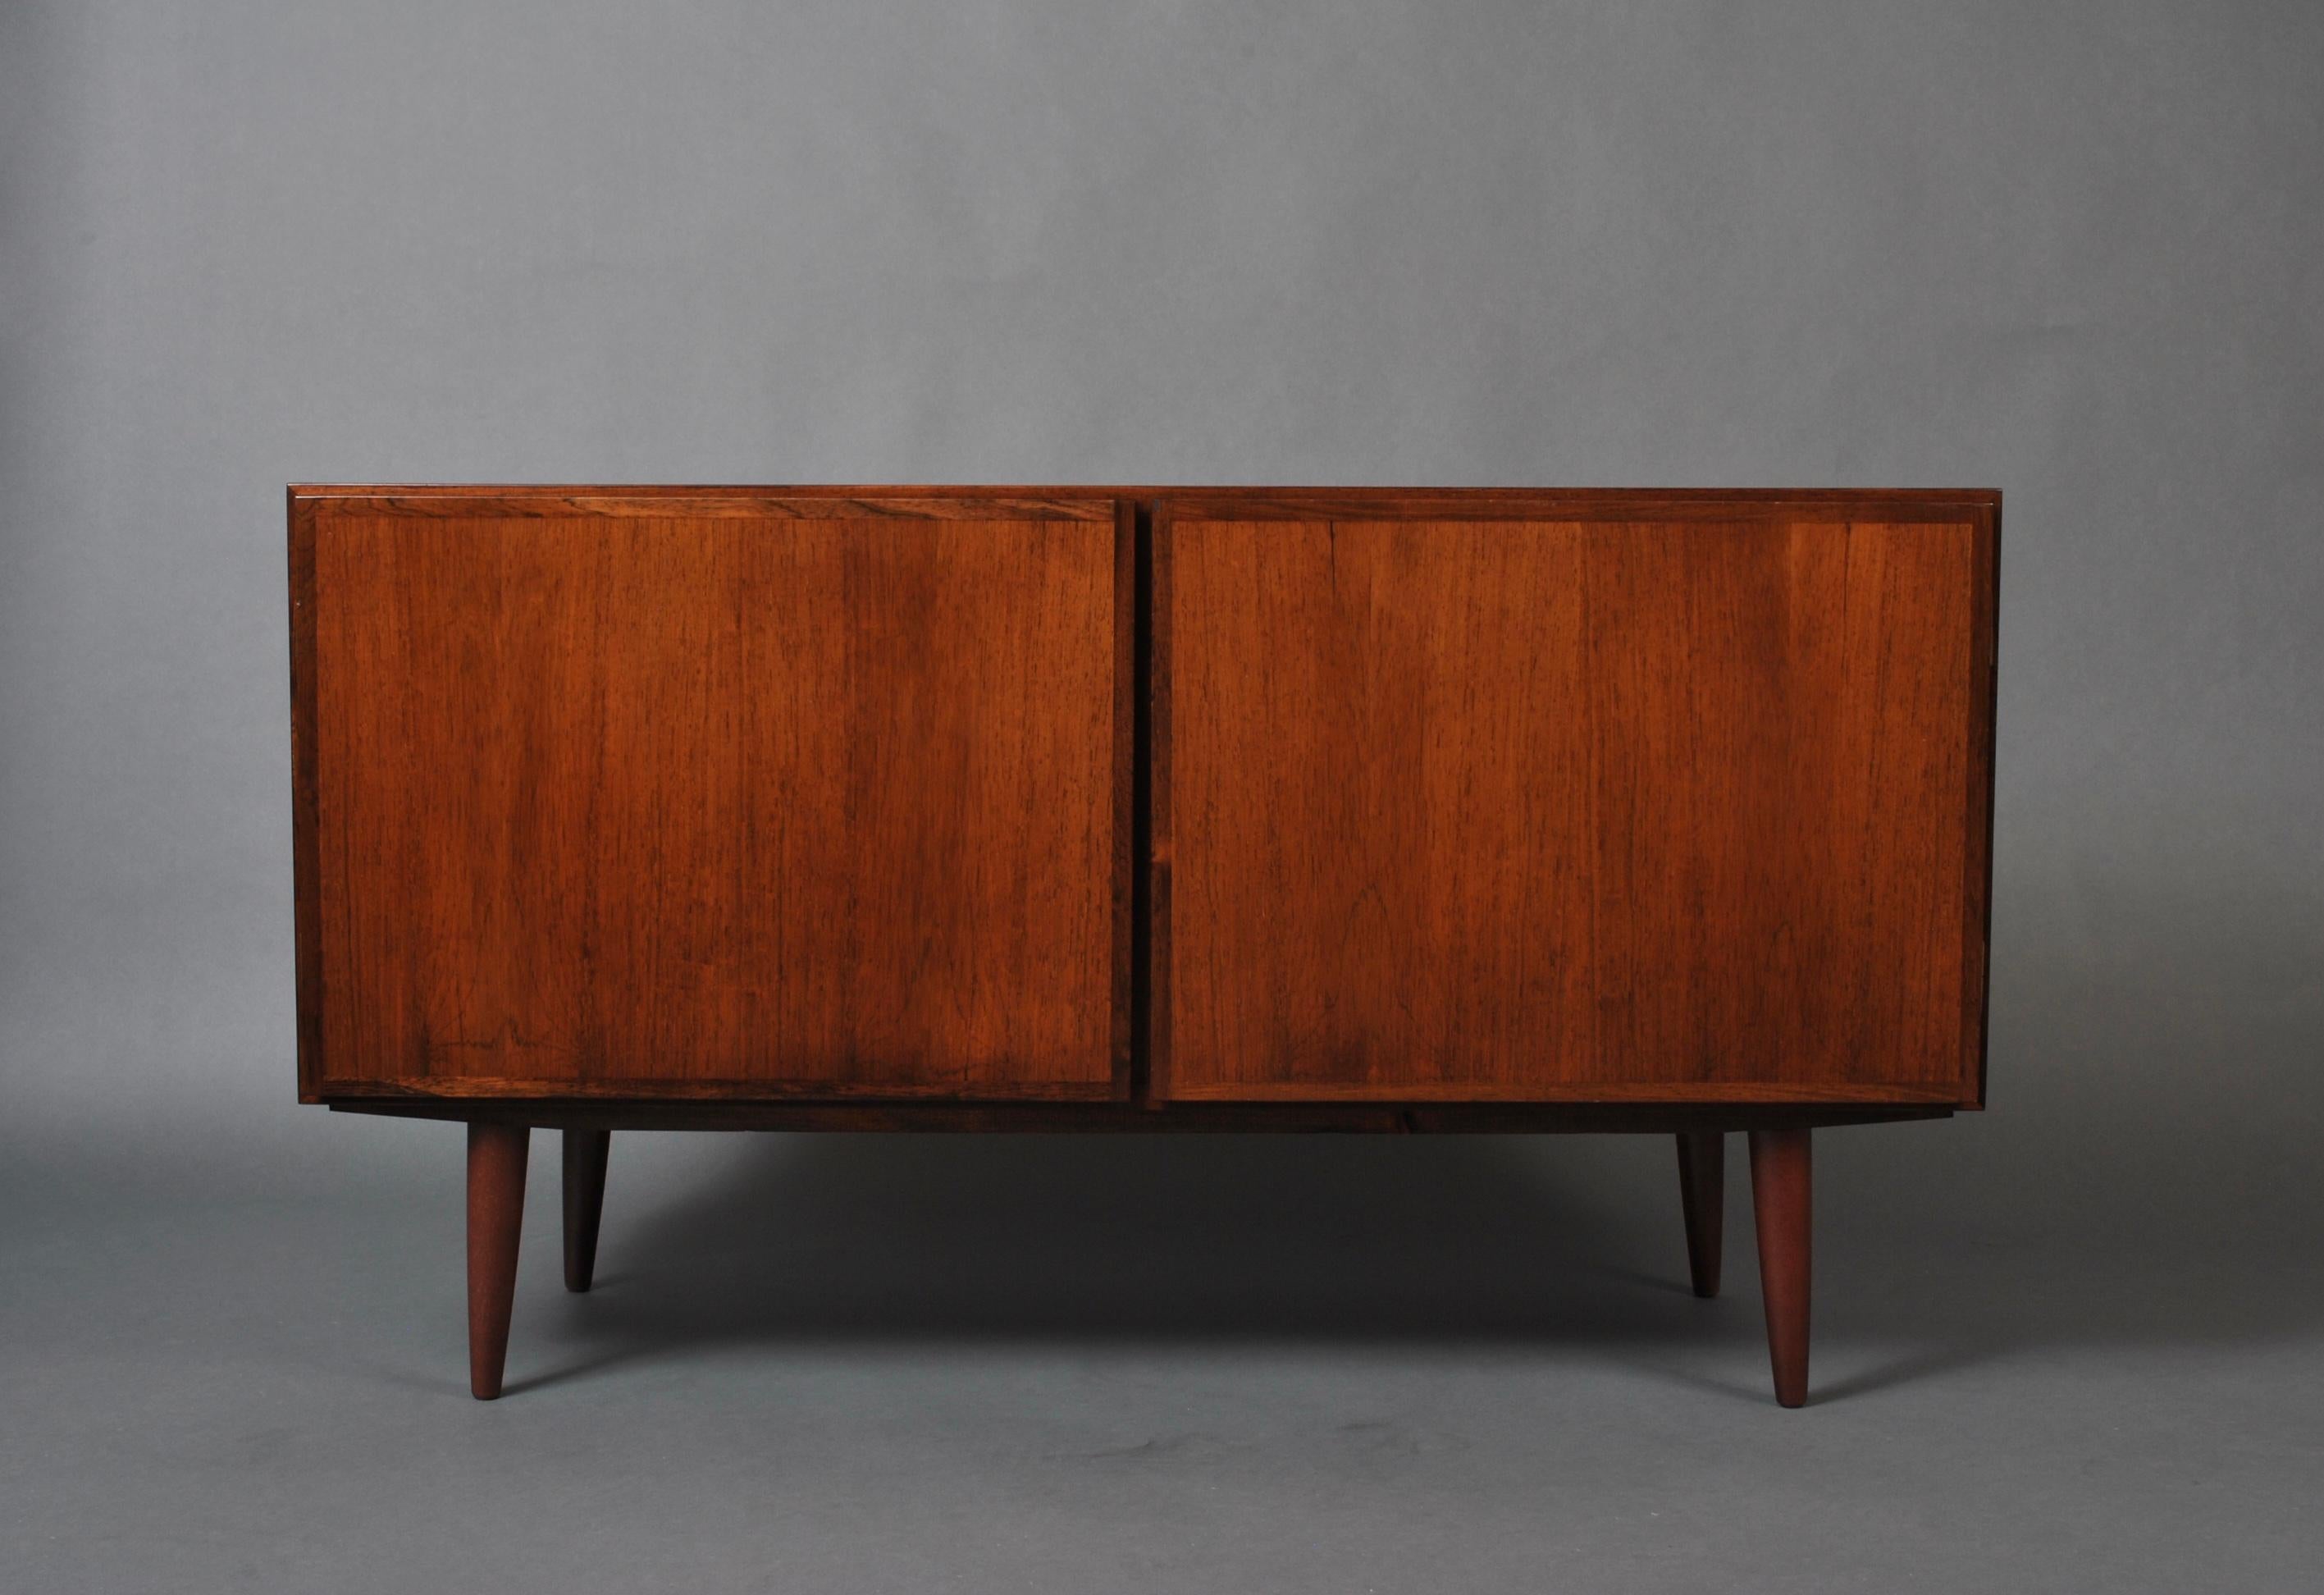 A mid-sized Danish midcentury credenza, sideboard by Poul Hundevad.
One adjustable shelf to each side of the interior. Produced in Denmark, circa 1960.